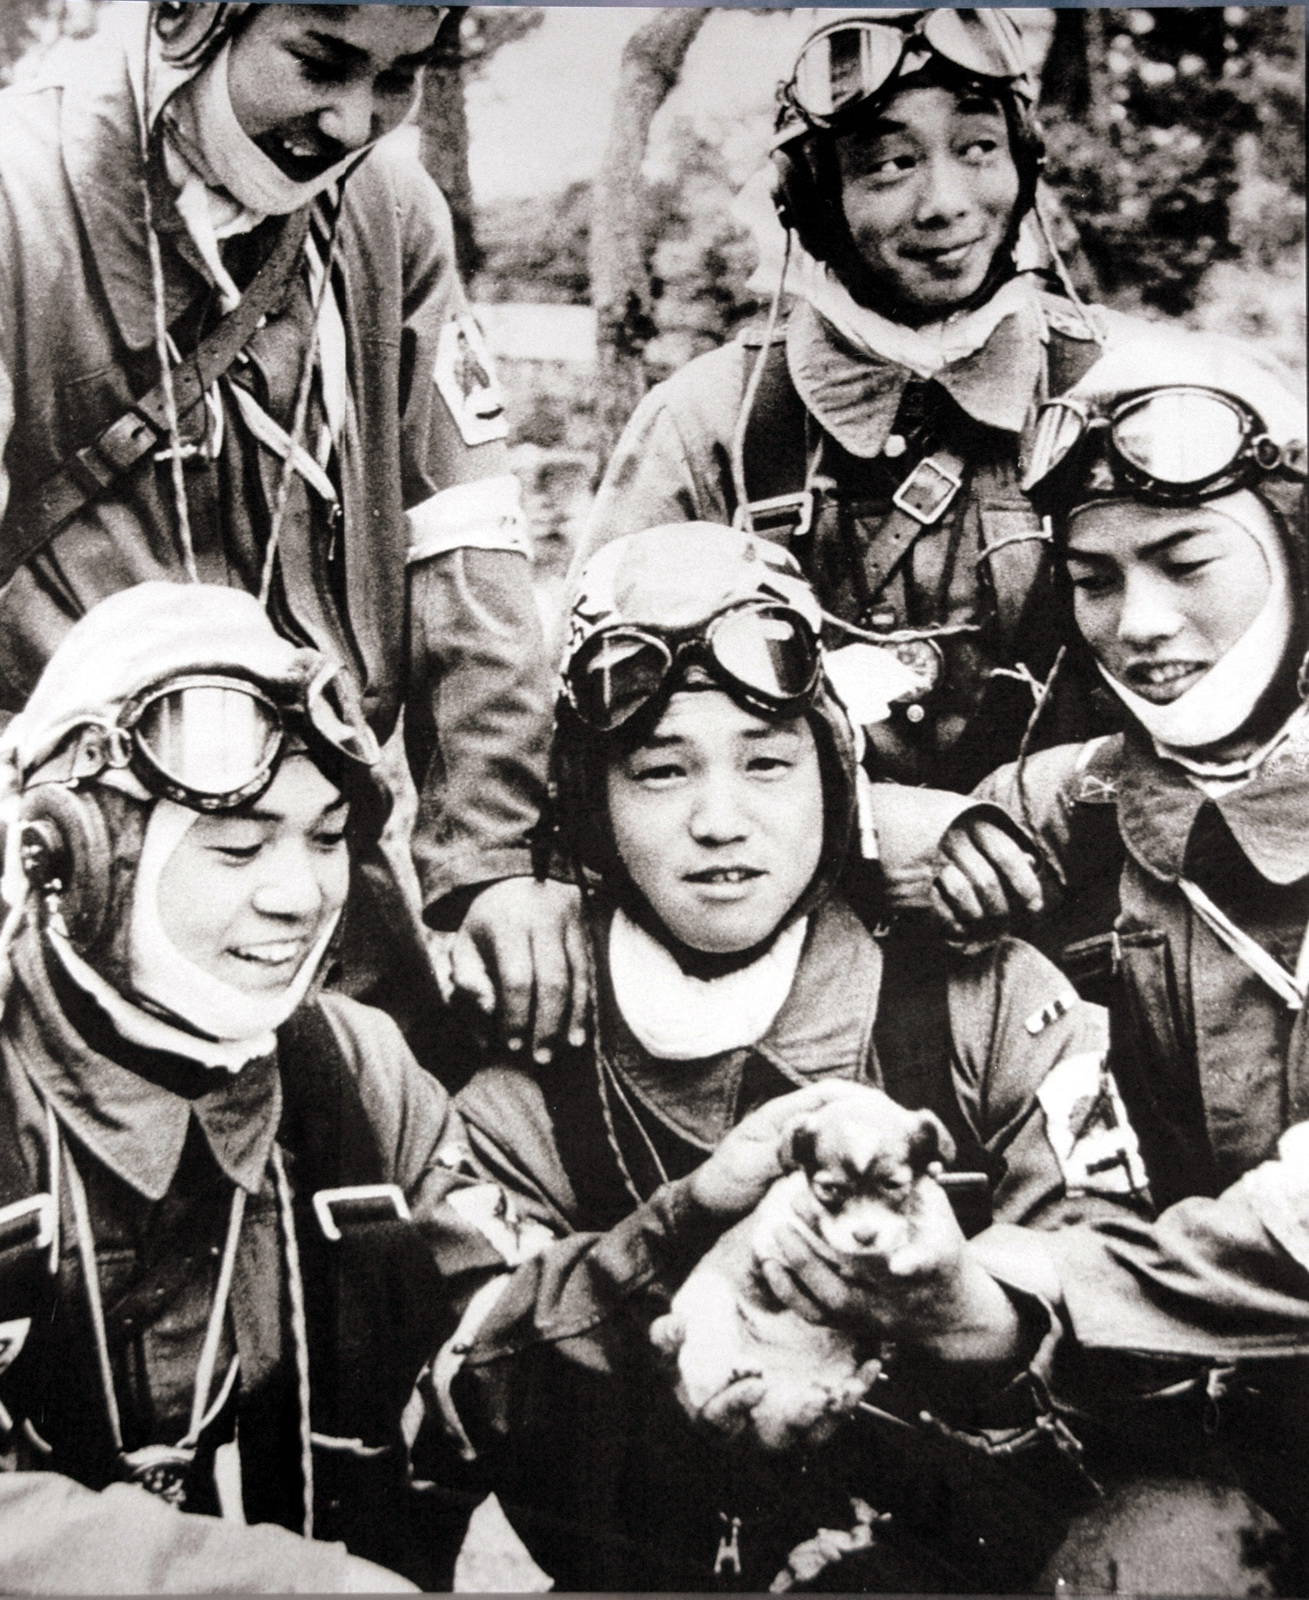 Five+kamikaze+pilots+playing+with+a+puppy,+May+26,+1945.jpg